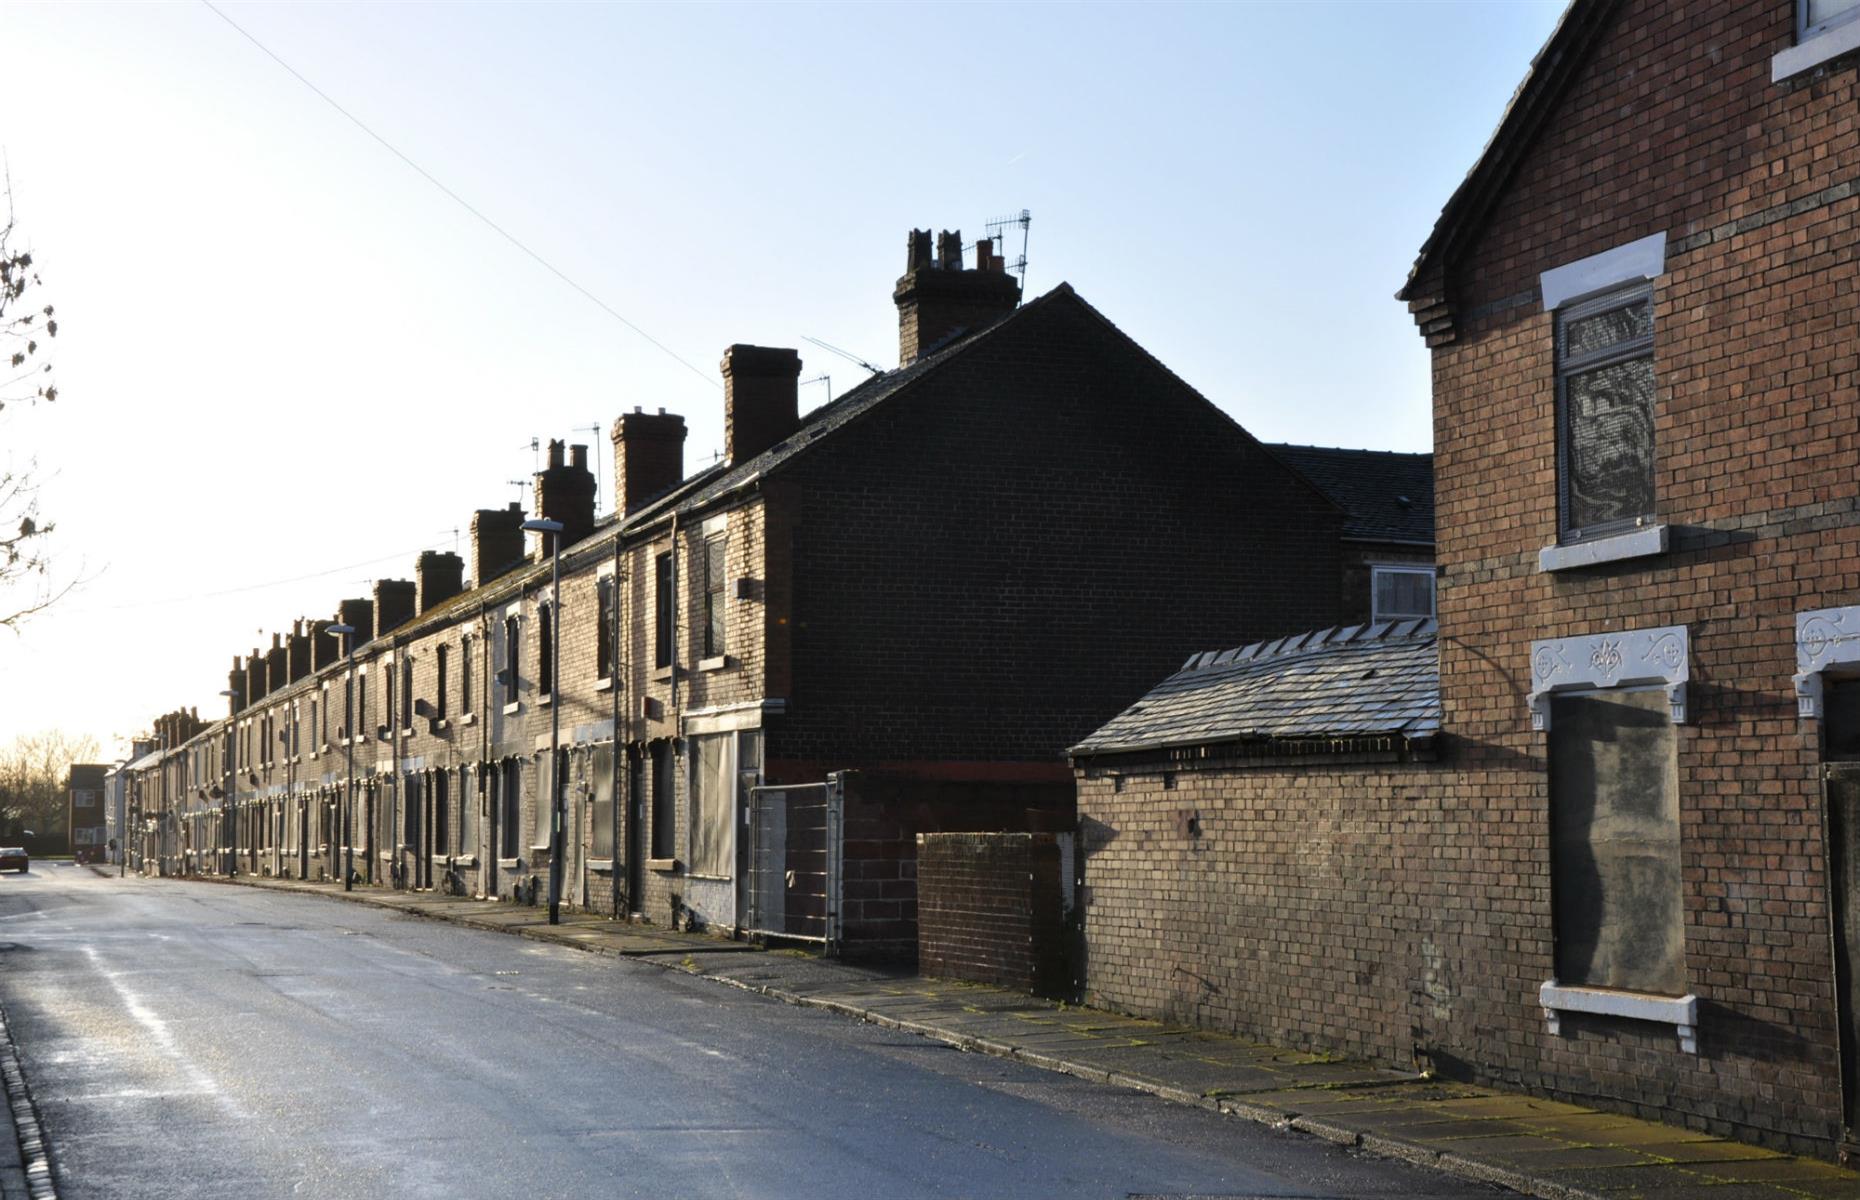 Boarded-up homes in Stoke-on-Trent